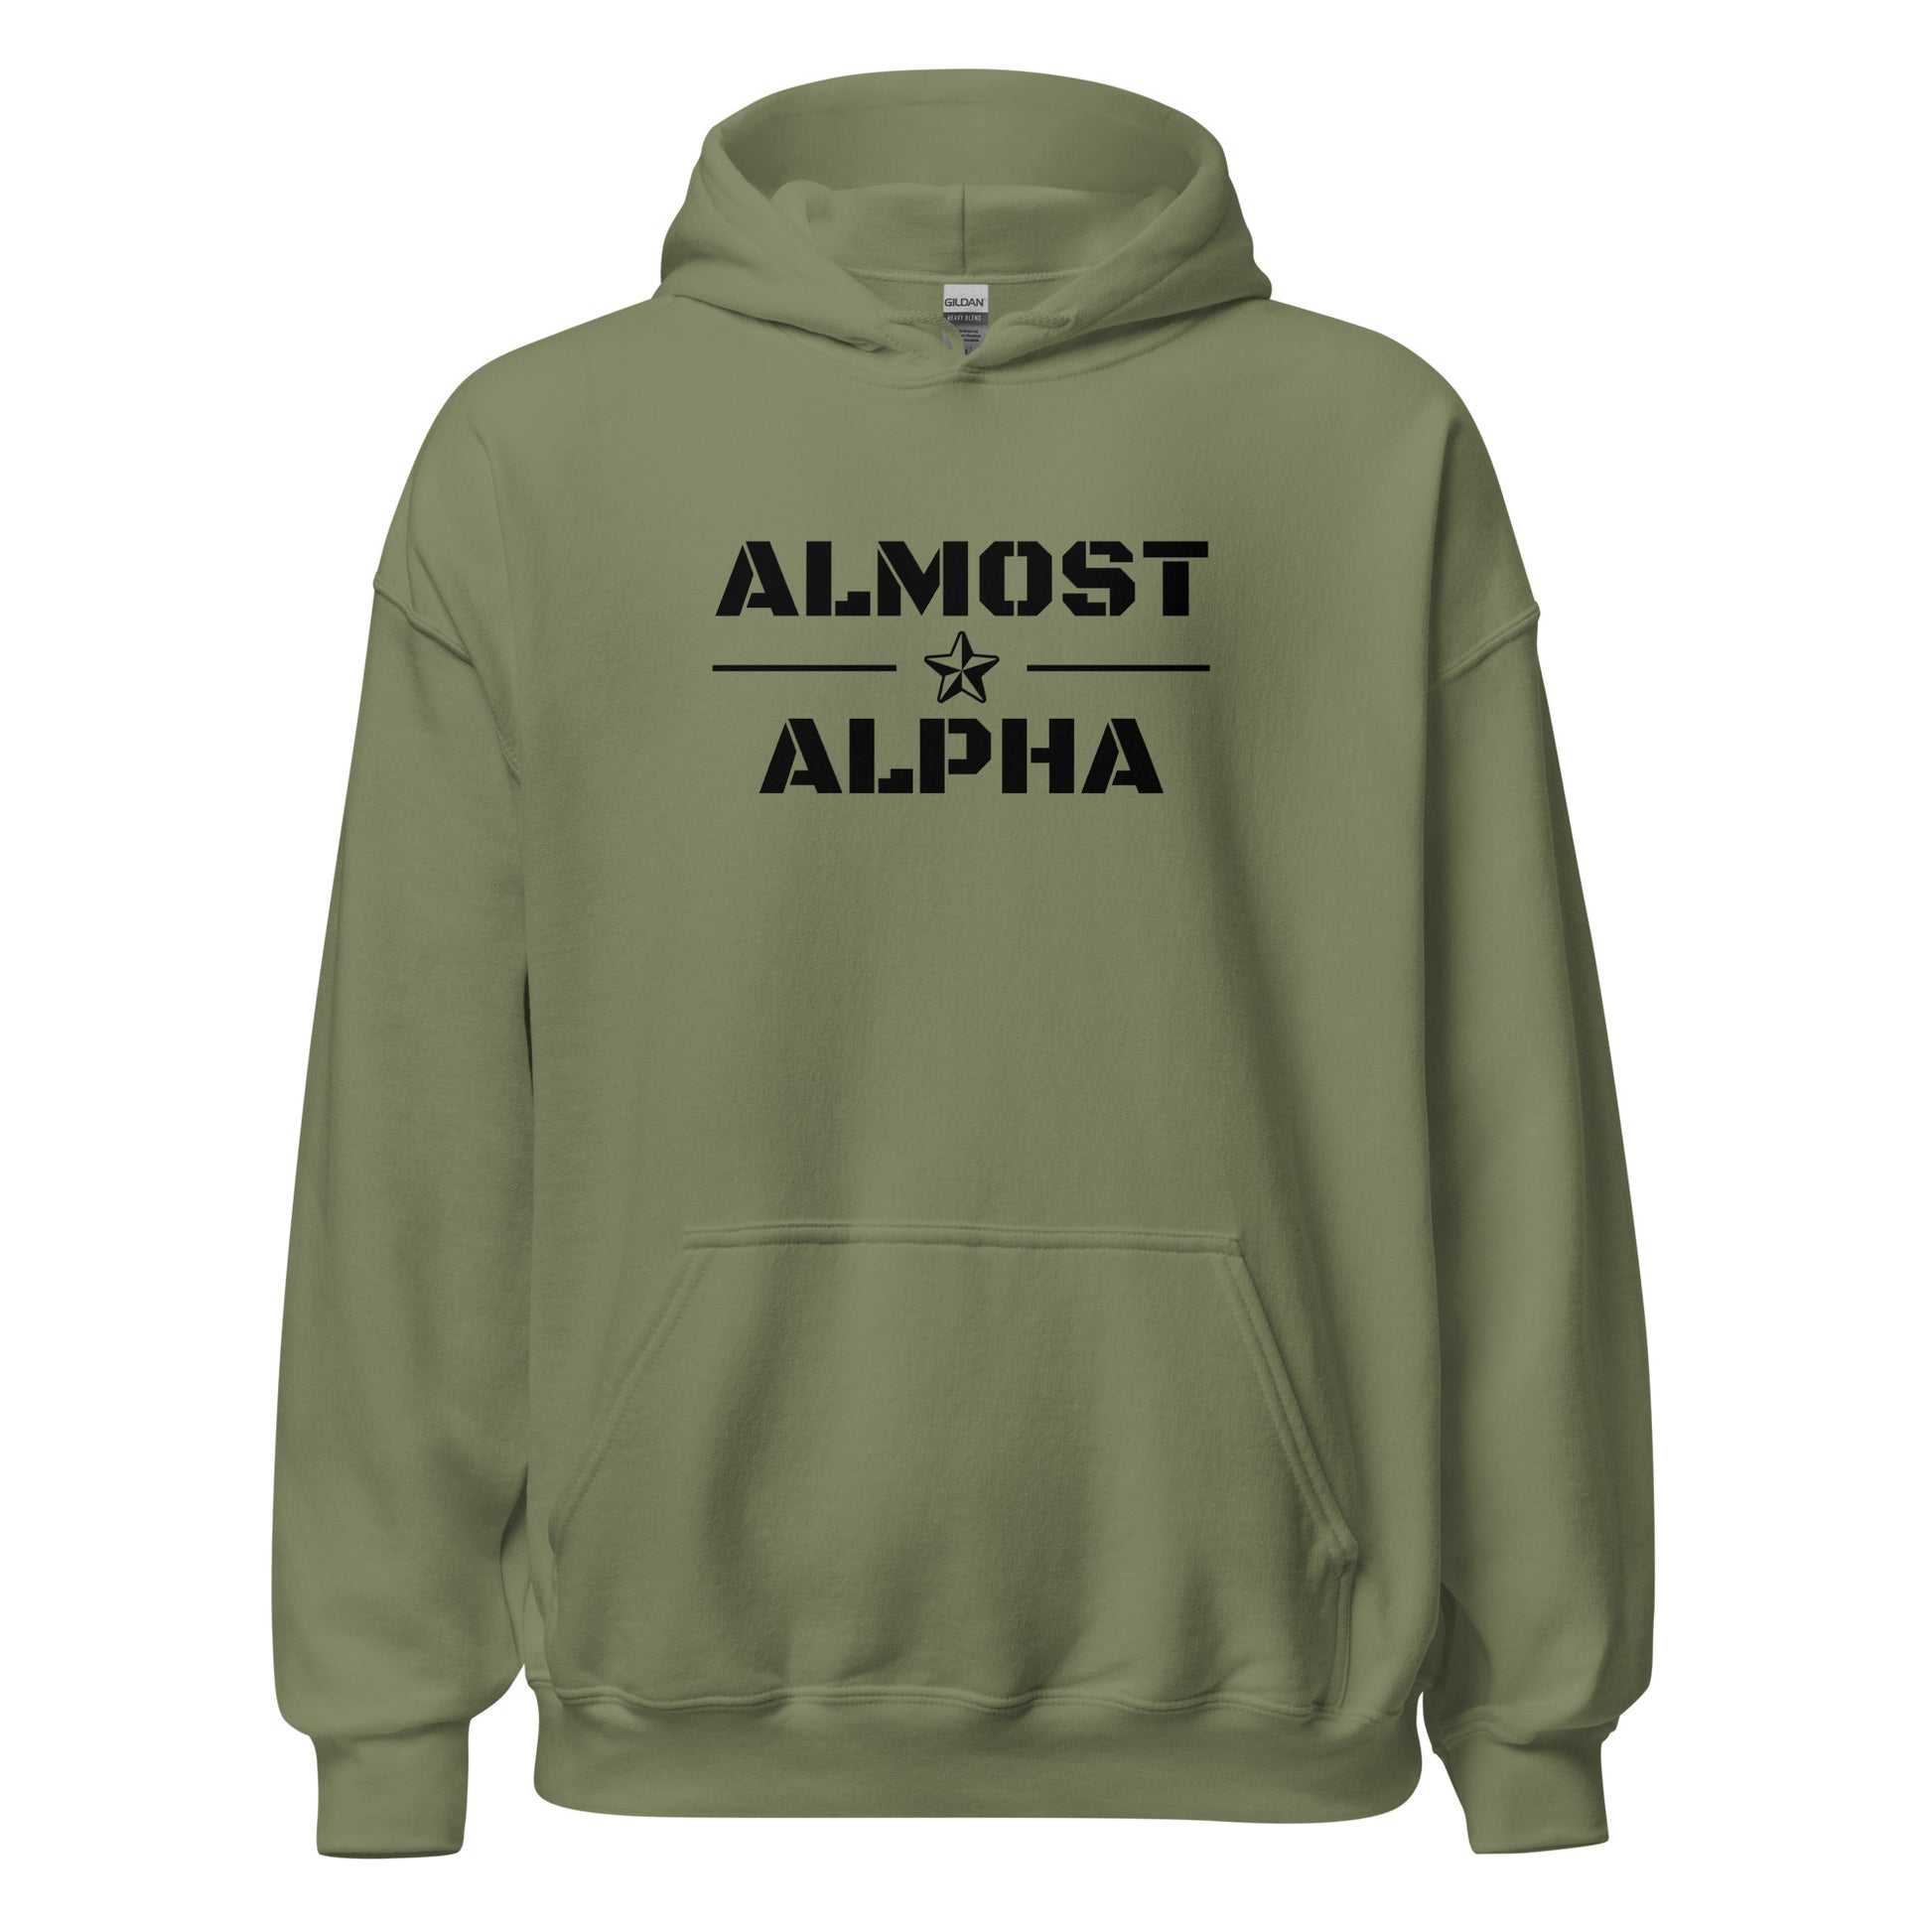 Almost Alpha Hoodie in Military Green